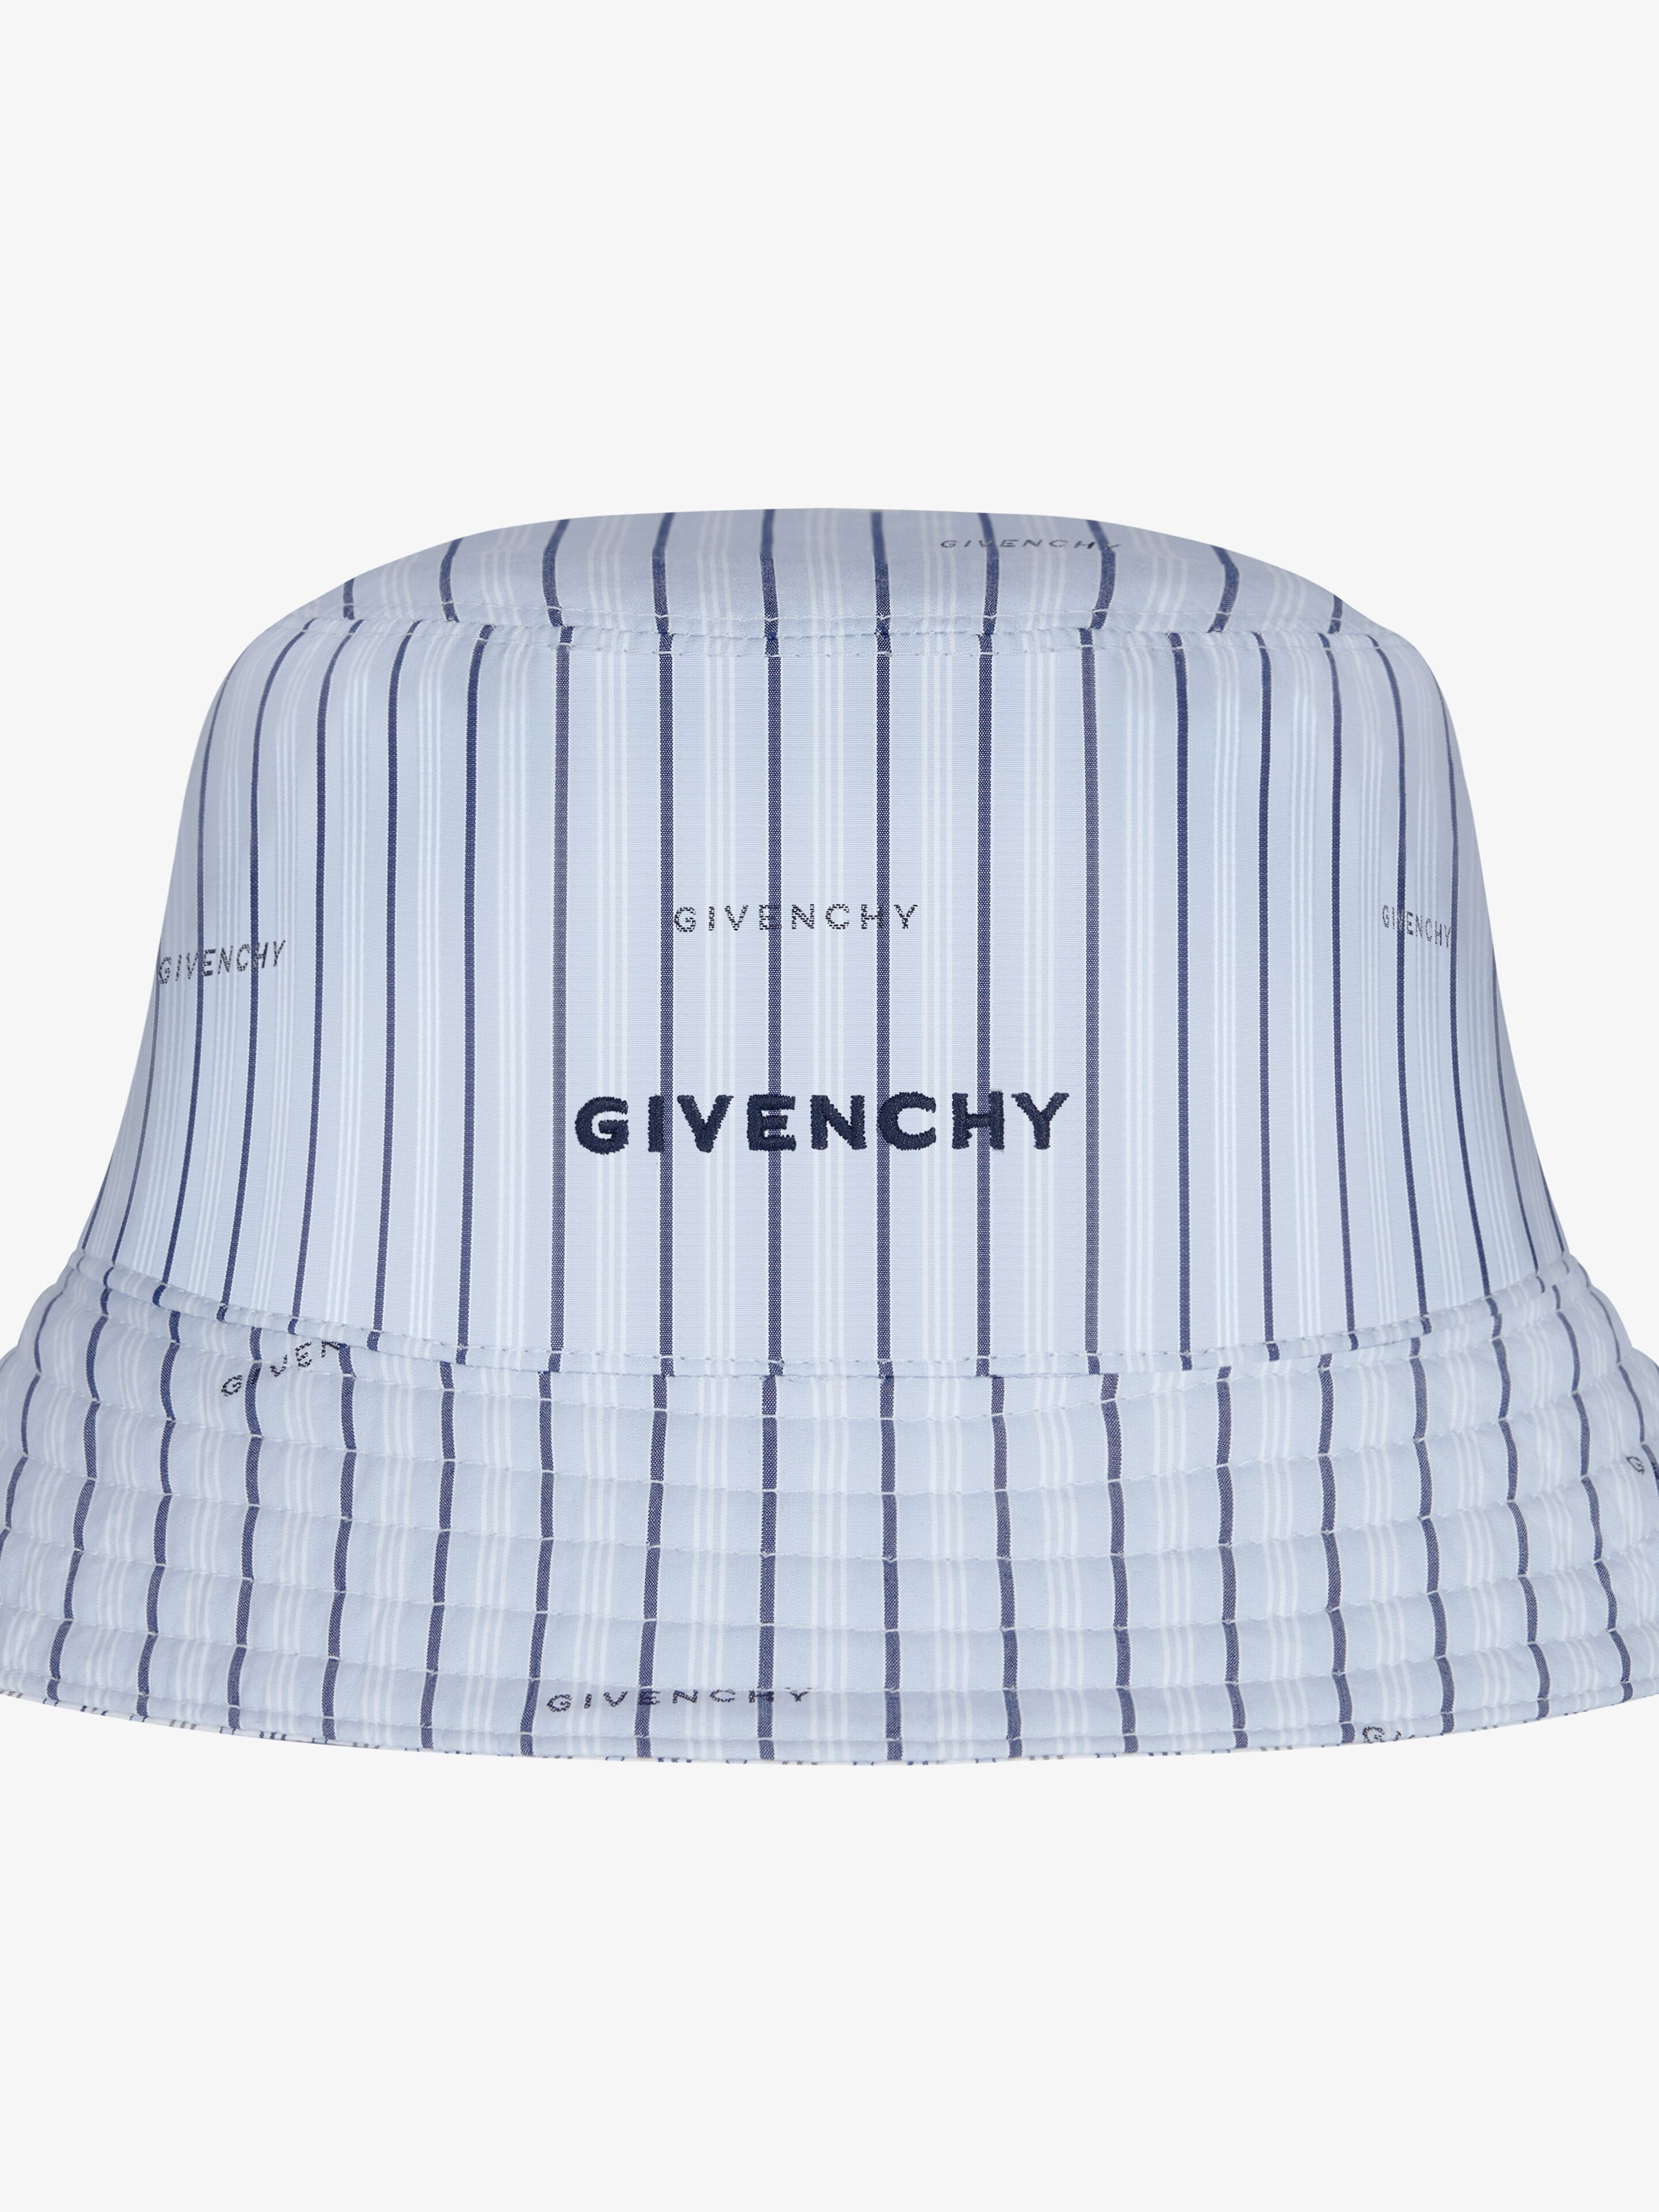 REVERSIBLE GIVENCHY BUCKET HAT - 2